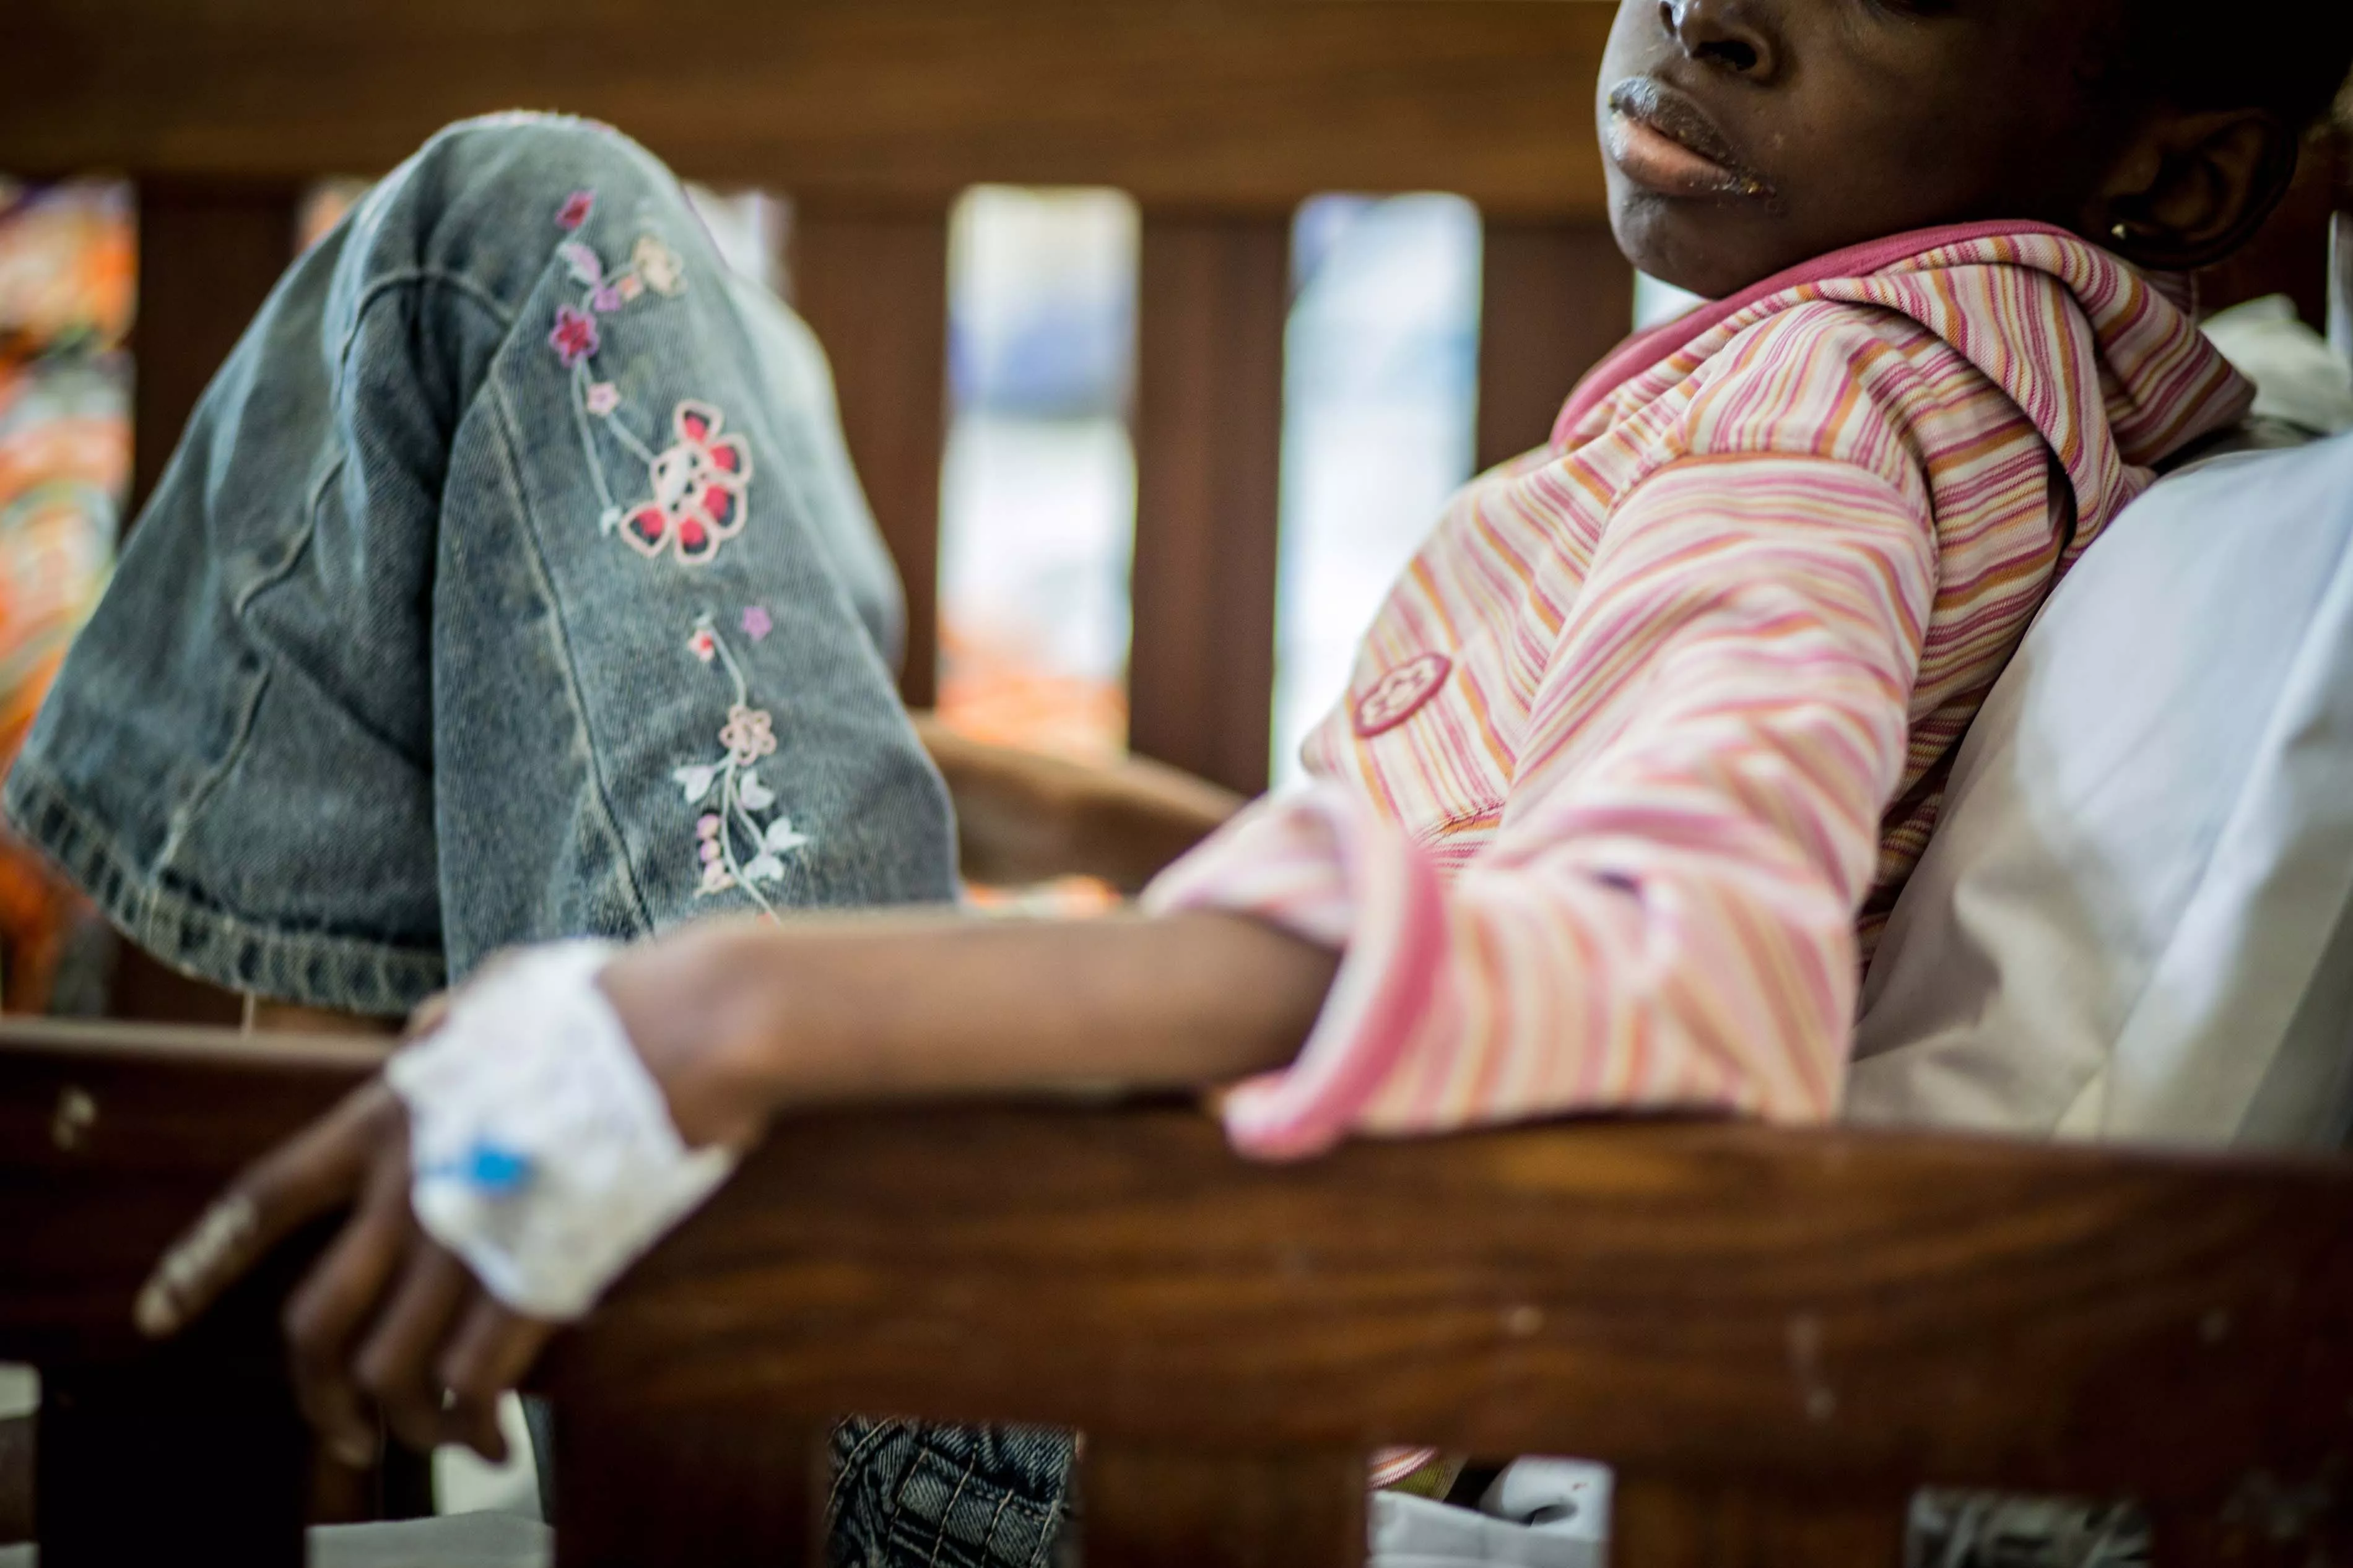 At just 12 years of age, Elise is has been weakened by HIV, though her resolve to beat the virus is steadfast.